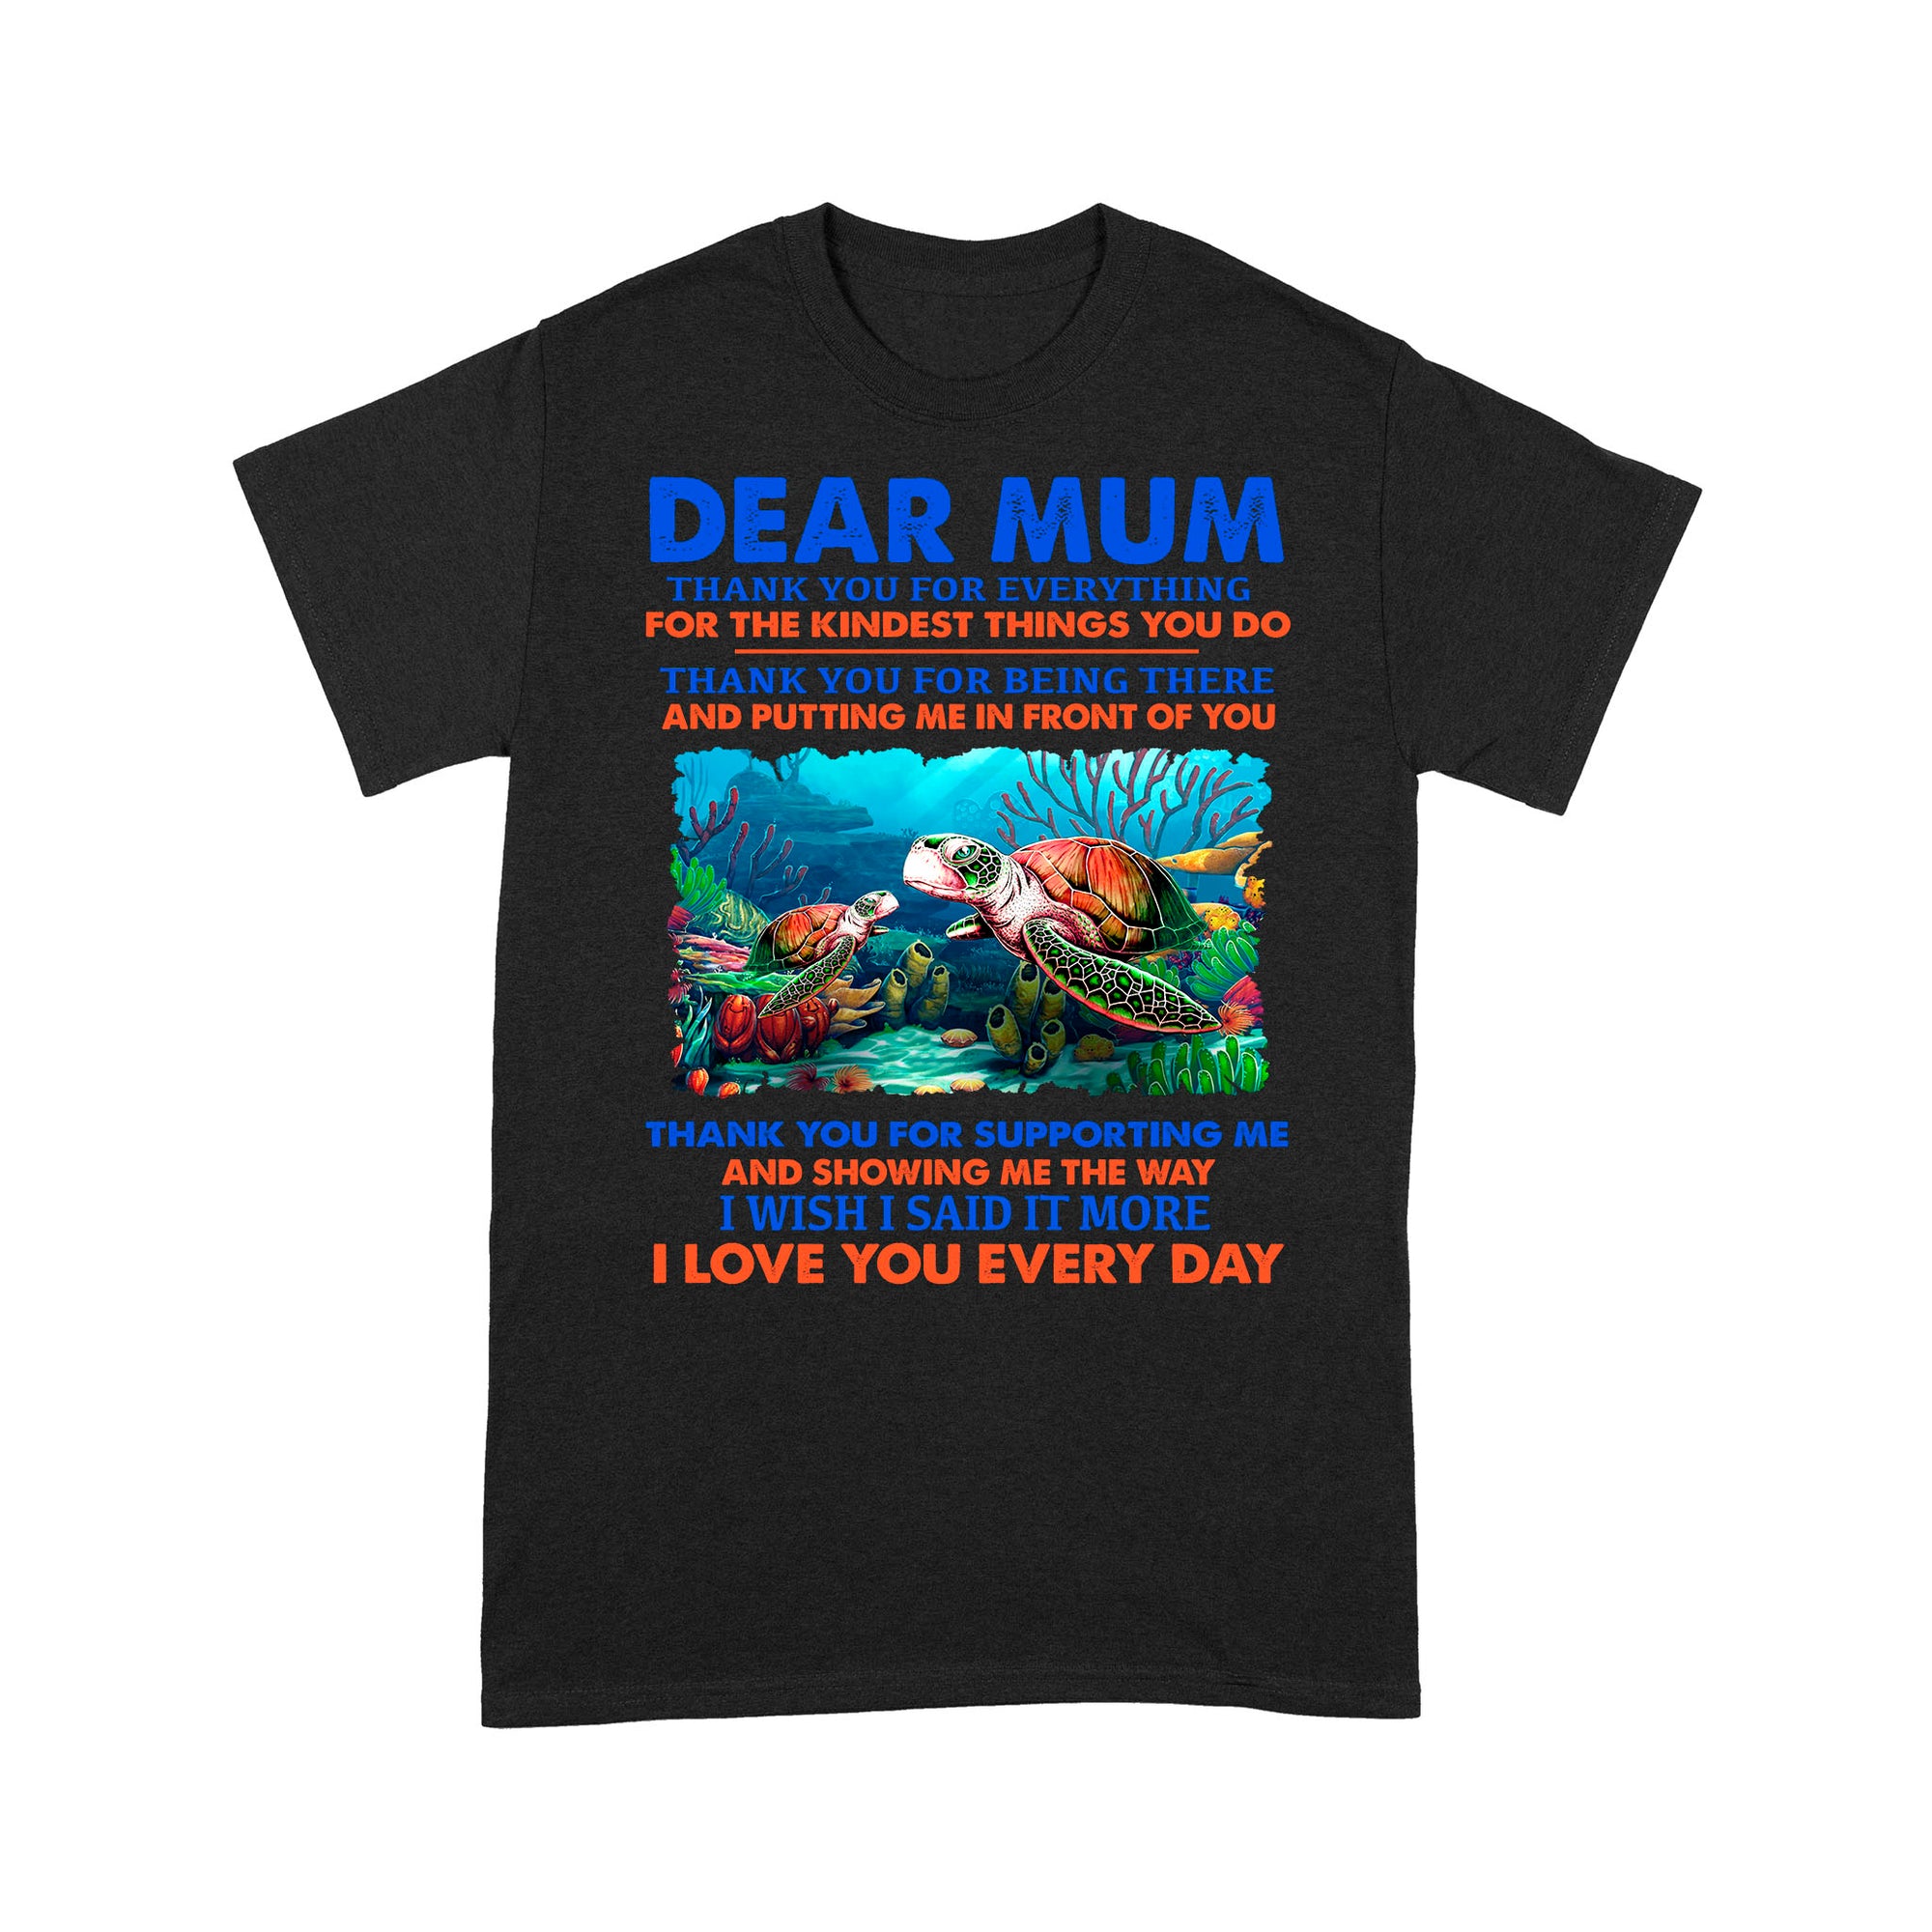 Dear Mum Thank You For Everything, For The Kindest Things You Do, Turtle - Standard T-Shirt